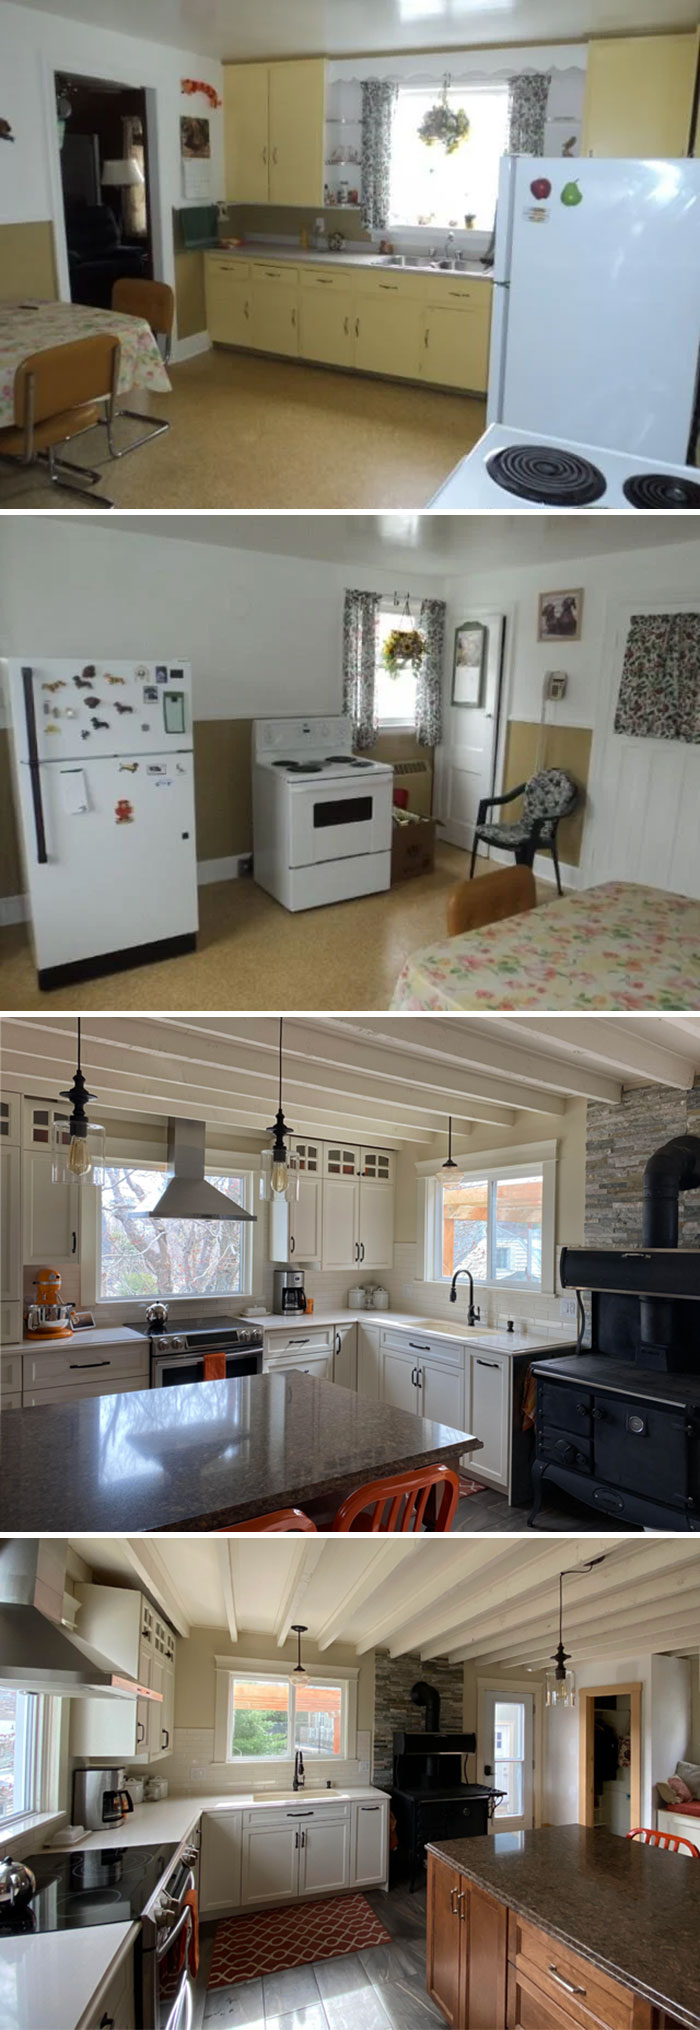 Efore And After - Kitchen Reno In Our 100+ Year Old Home